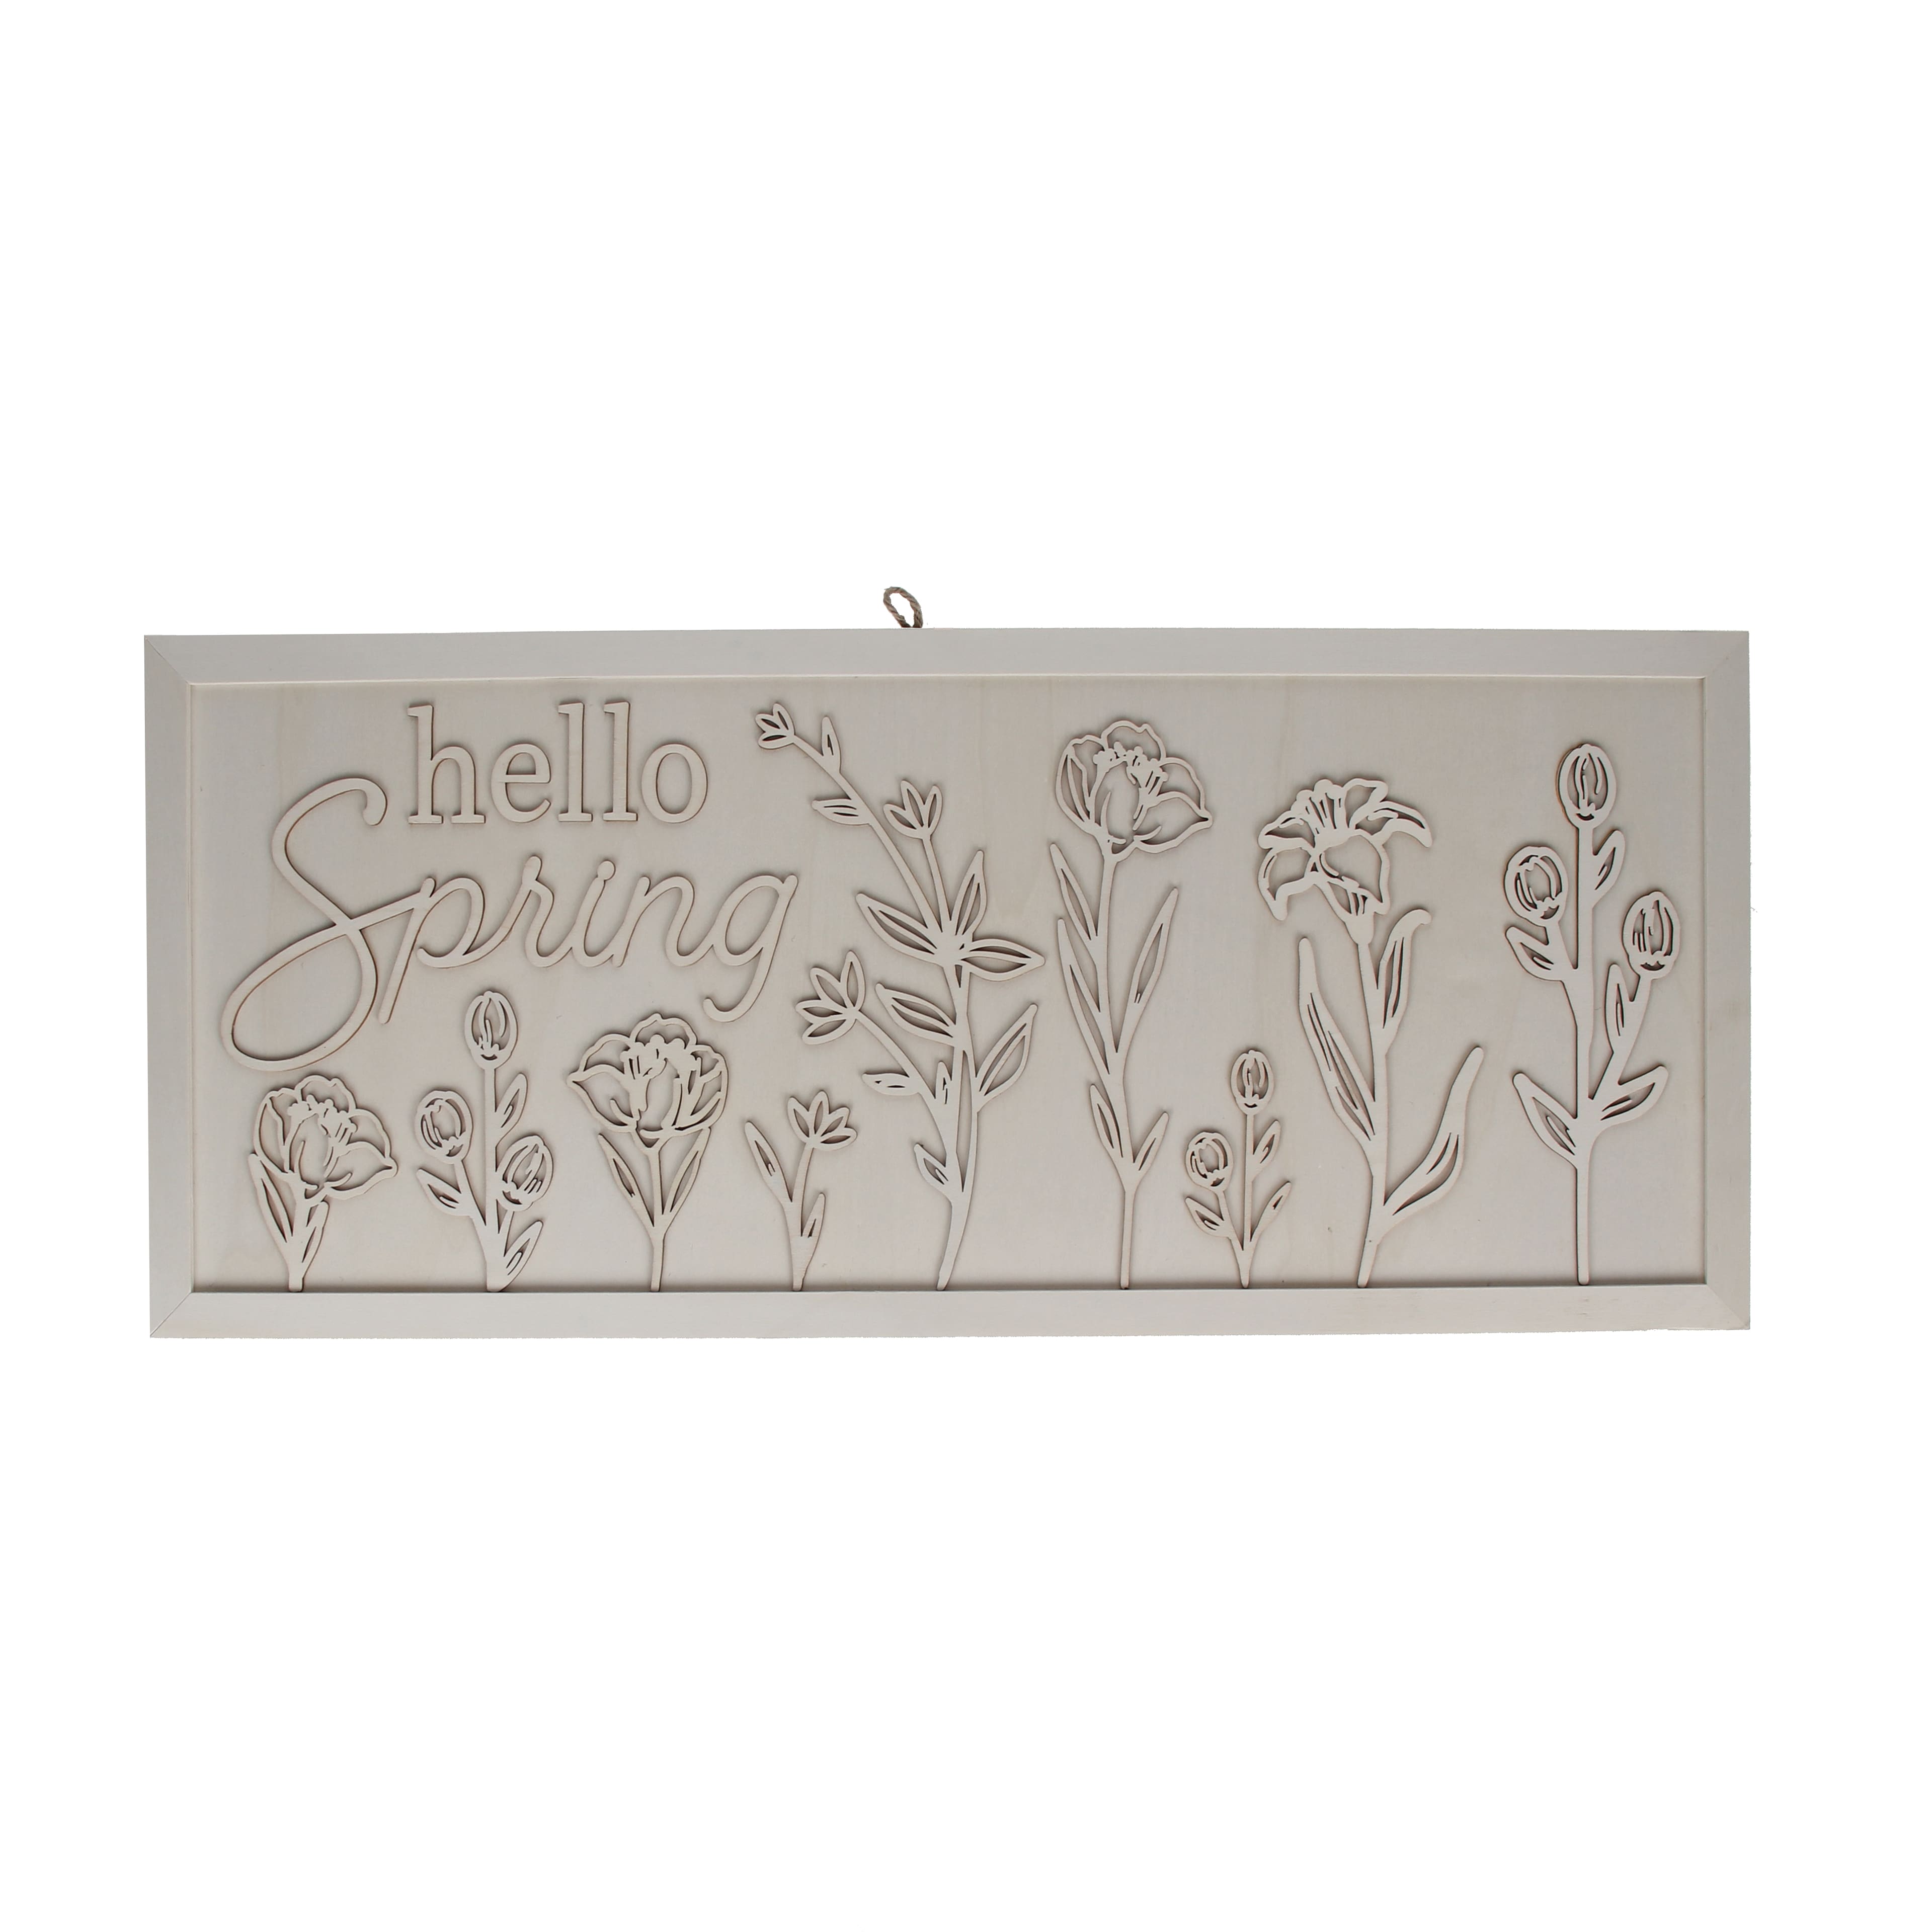 28 x 12 Wood Framed Hello Spring Plaque by Make Market®